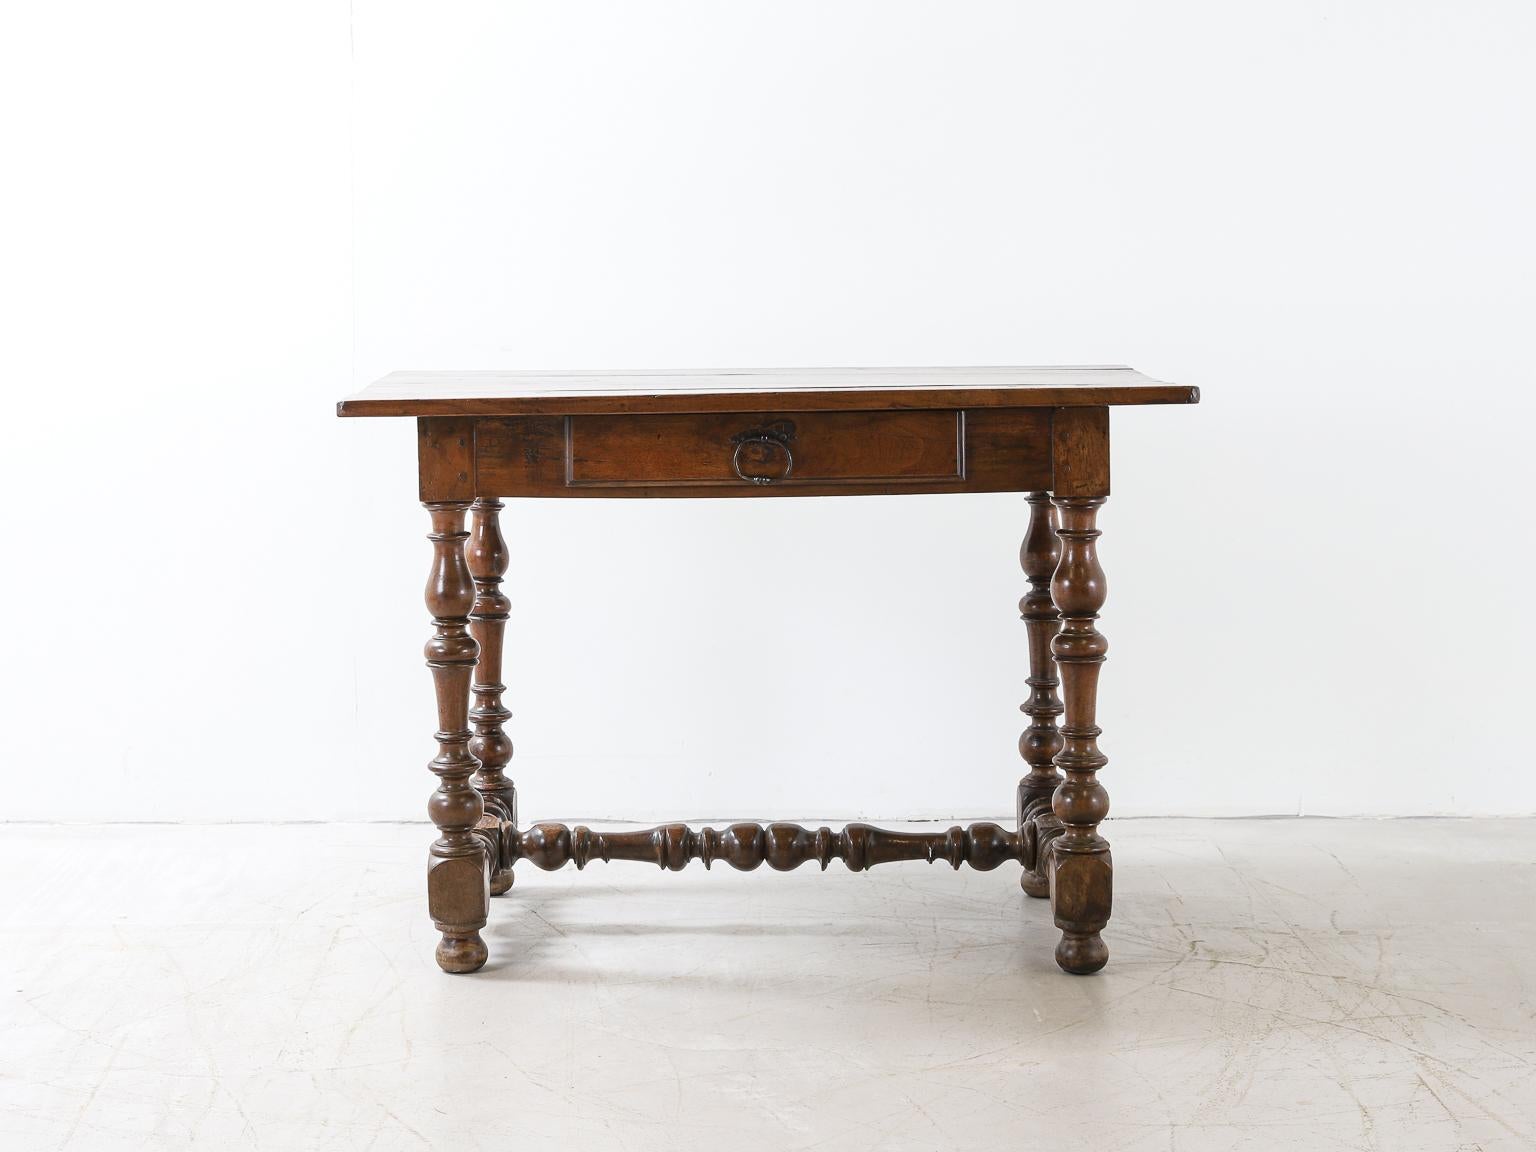 An early 18th century oak table originating in Europe. With beautifully turned legs connected by a stretcher, boarded top and single drawer with original iron pull.